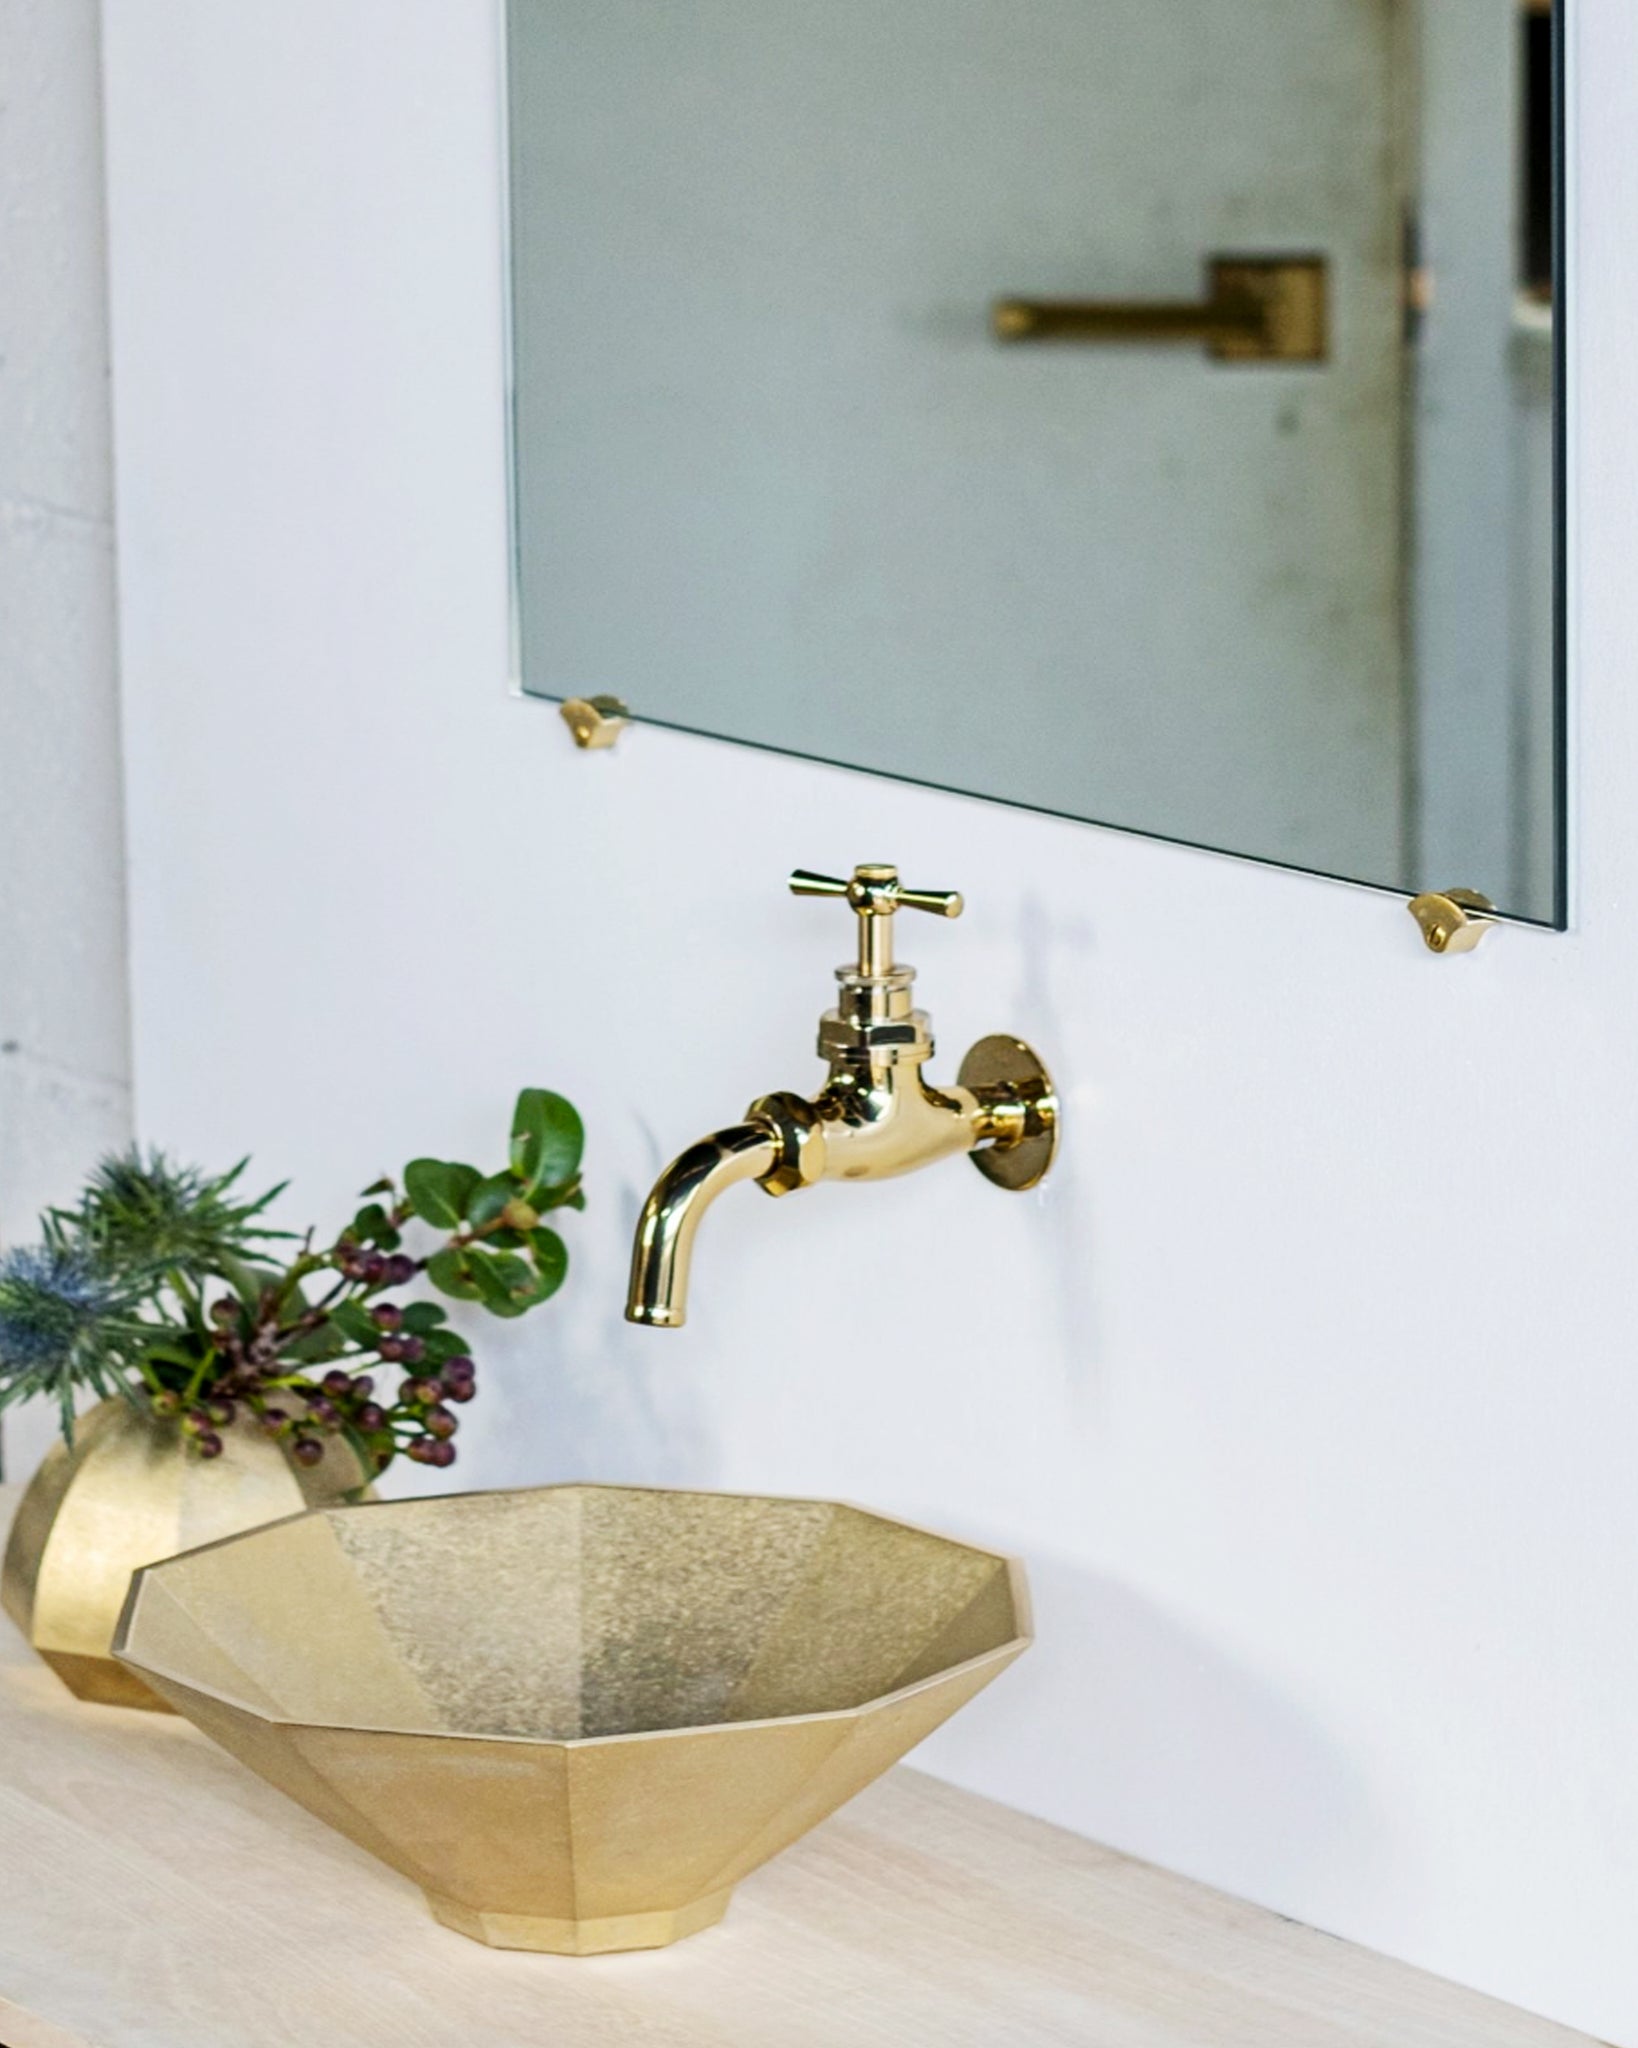 Matureware bath items installed in a space featuring wash bowl, facet, vase, and mirror stoppers. Matureware lever and handle on a door is also reflected through the mirror.